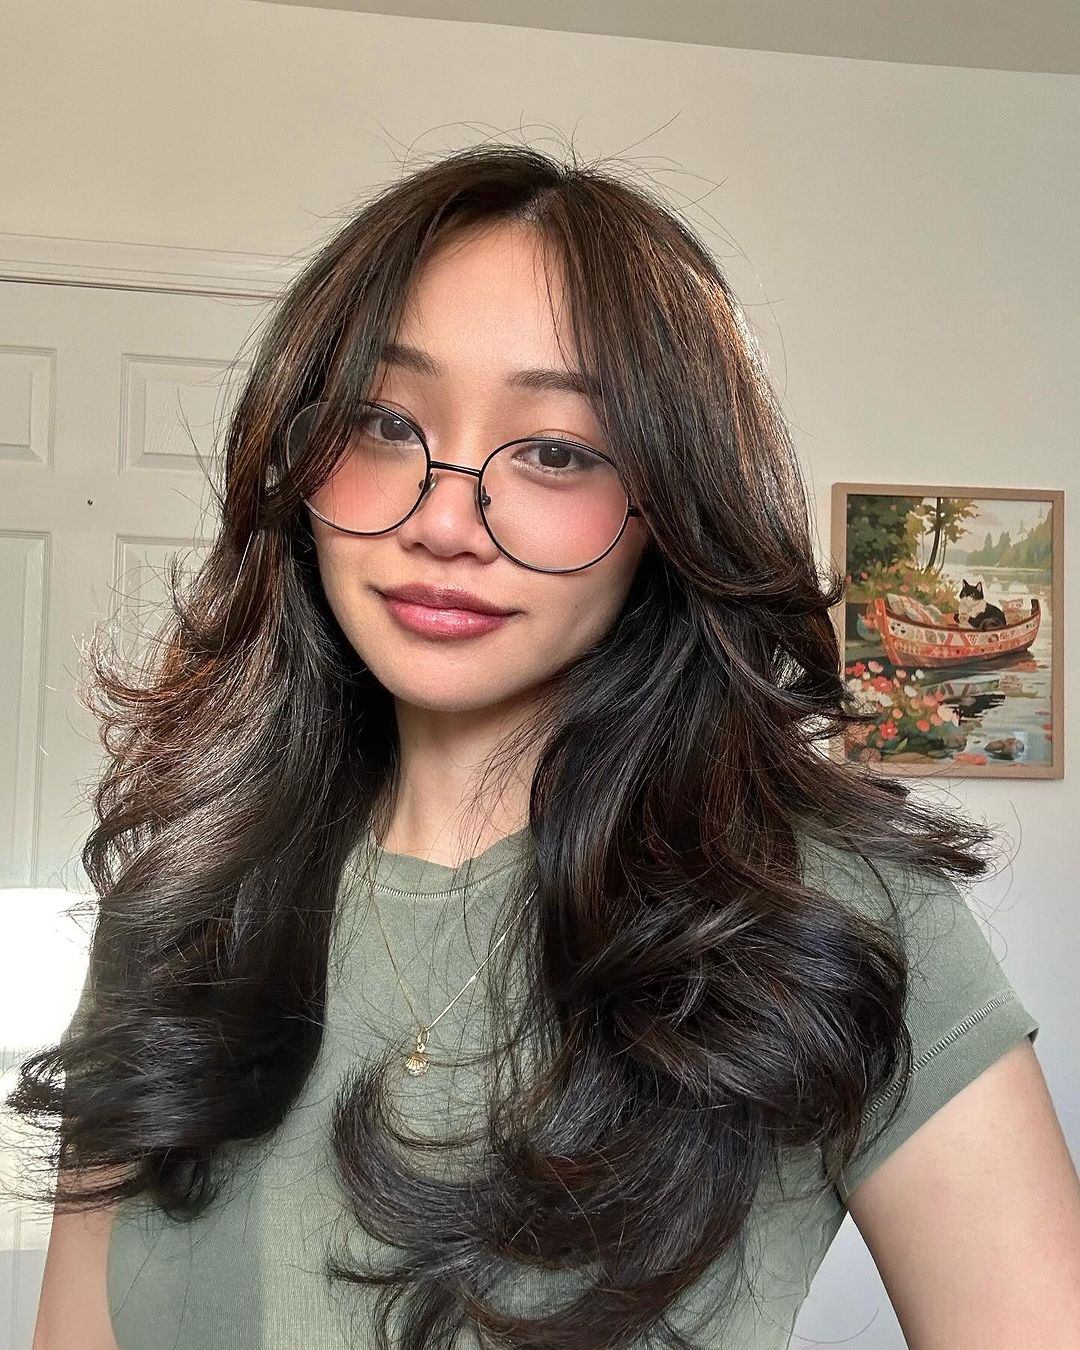 Asian layered haristyle for women with glasses